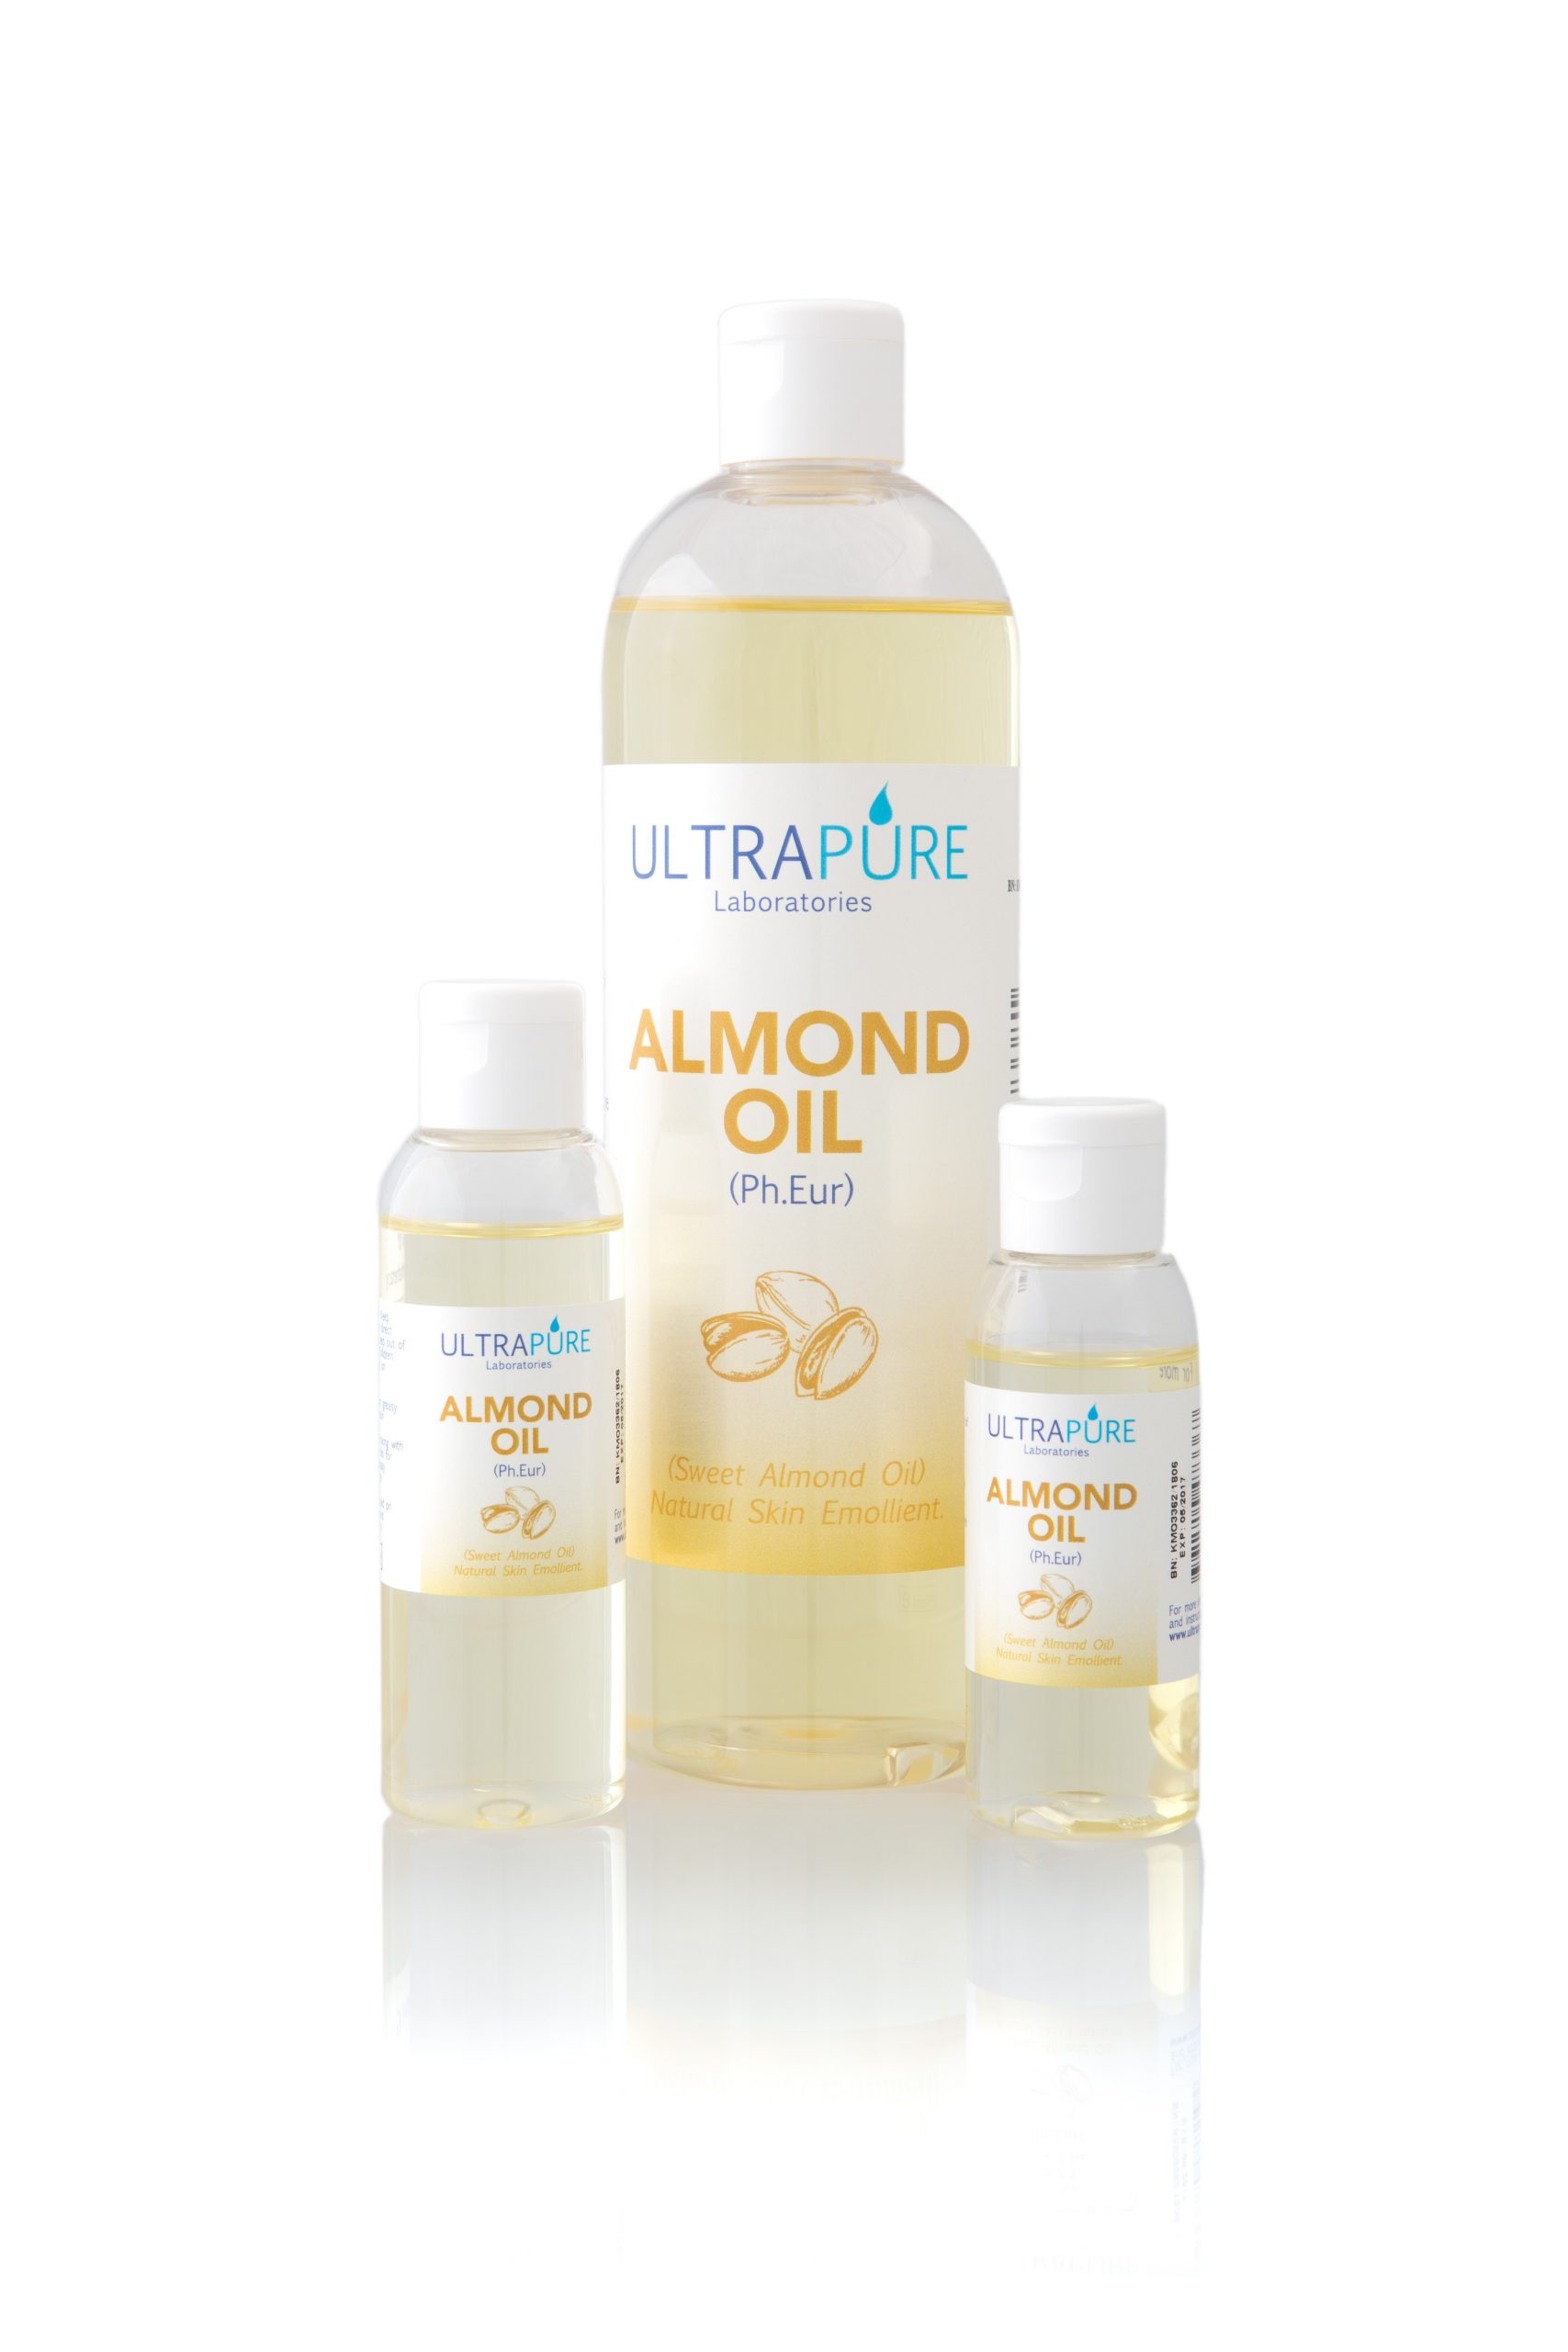 Why we love Sweet Almond Oil